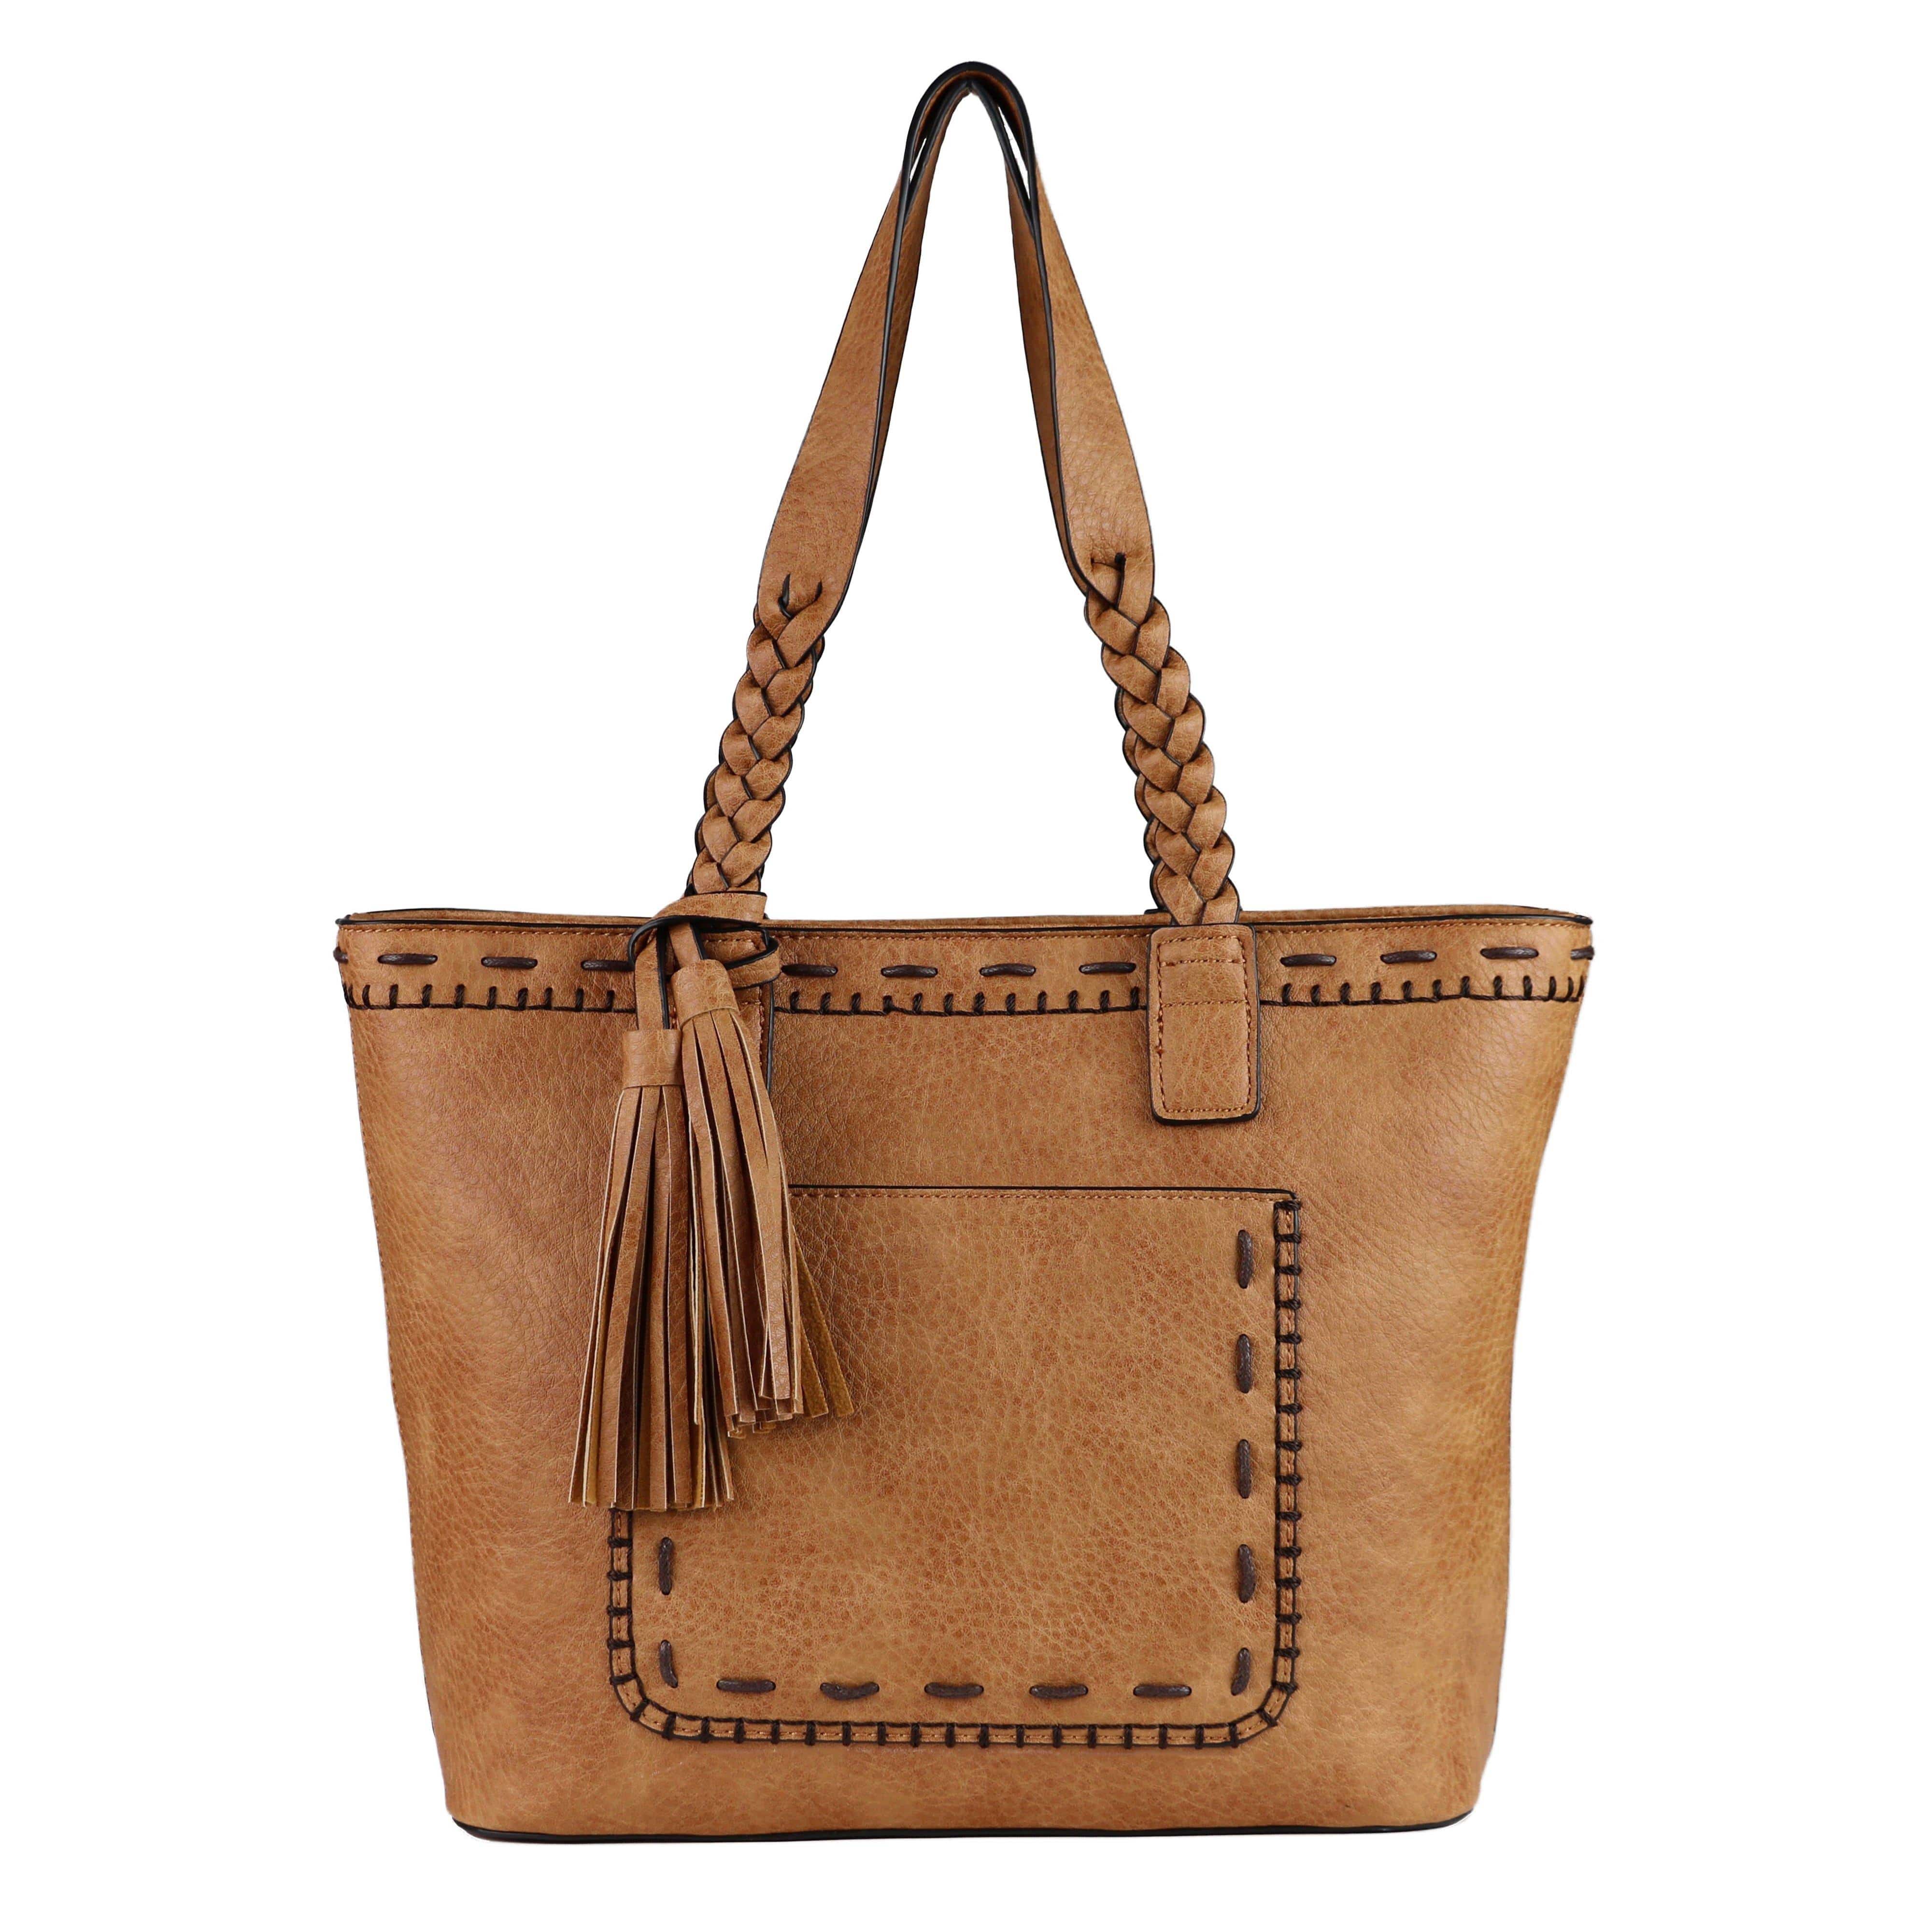 Lady Conceal Cora Stitched Tote